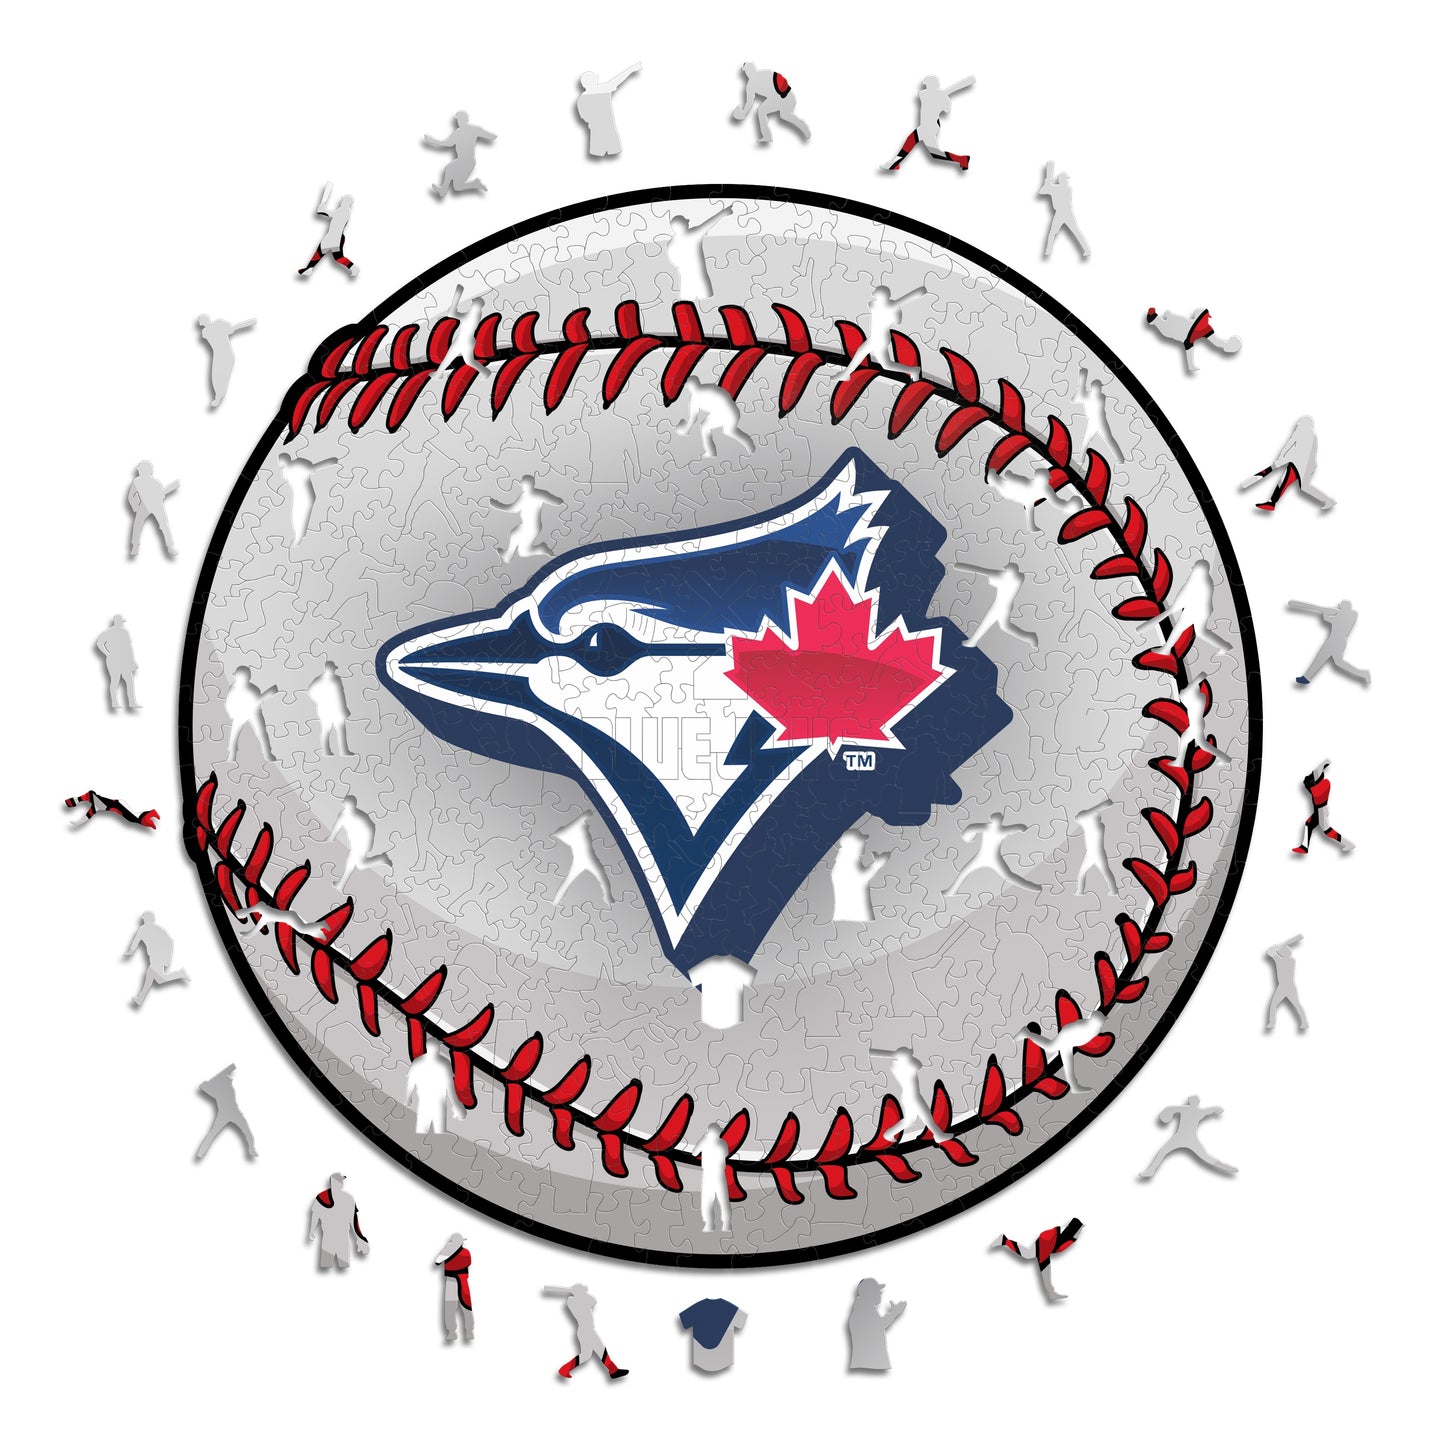 3 MLB Puzzles Of Your Choice (Up To 60% OFF)